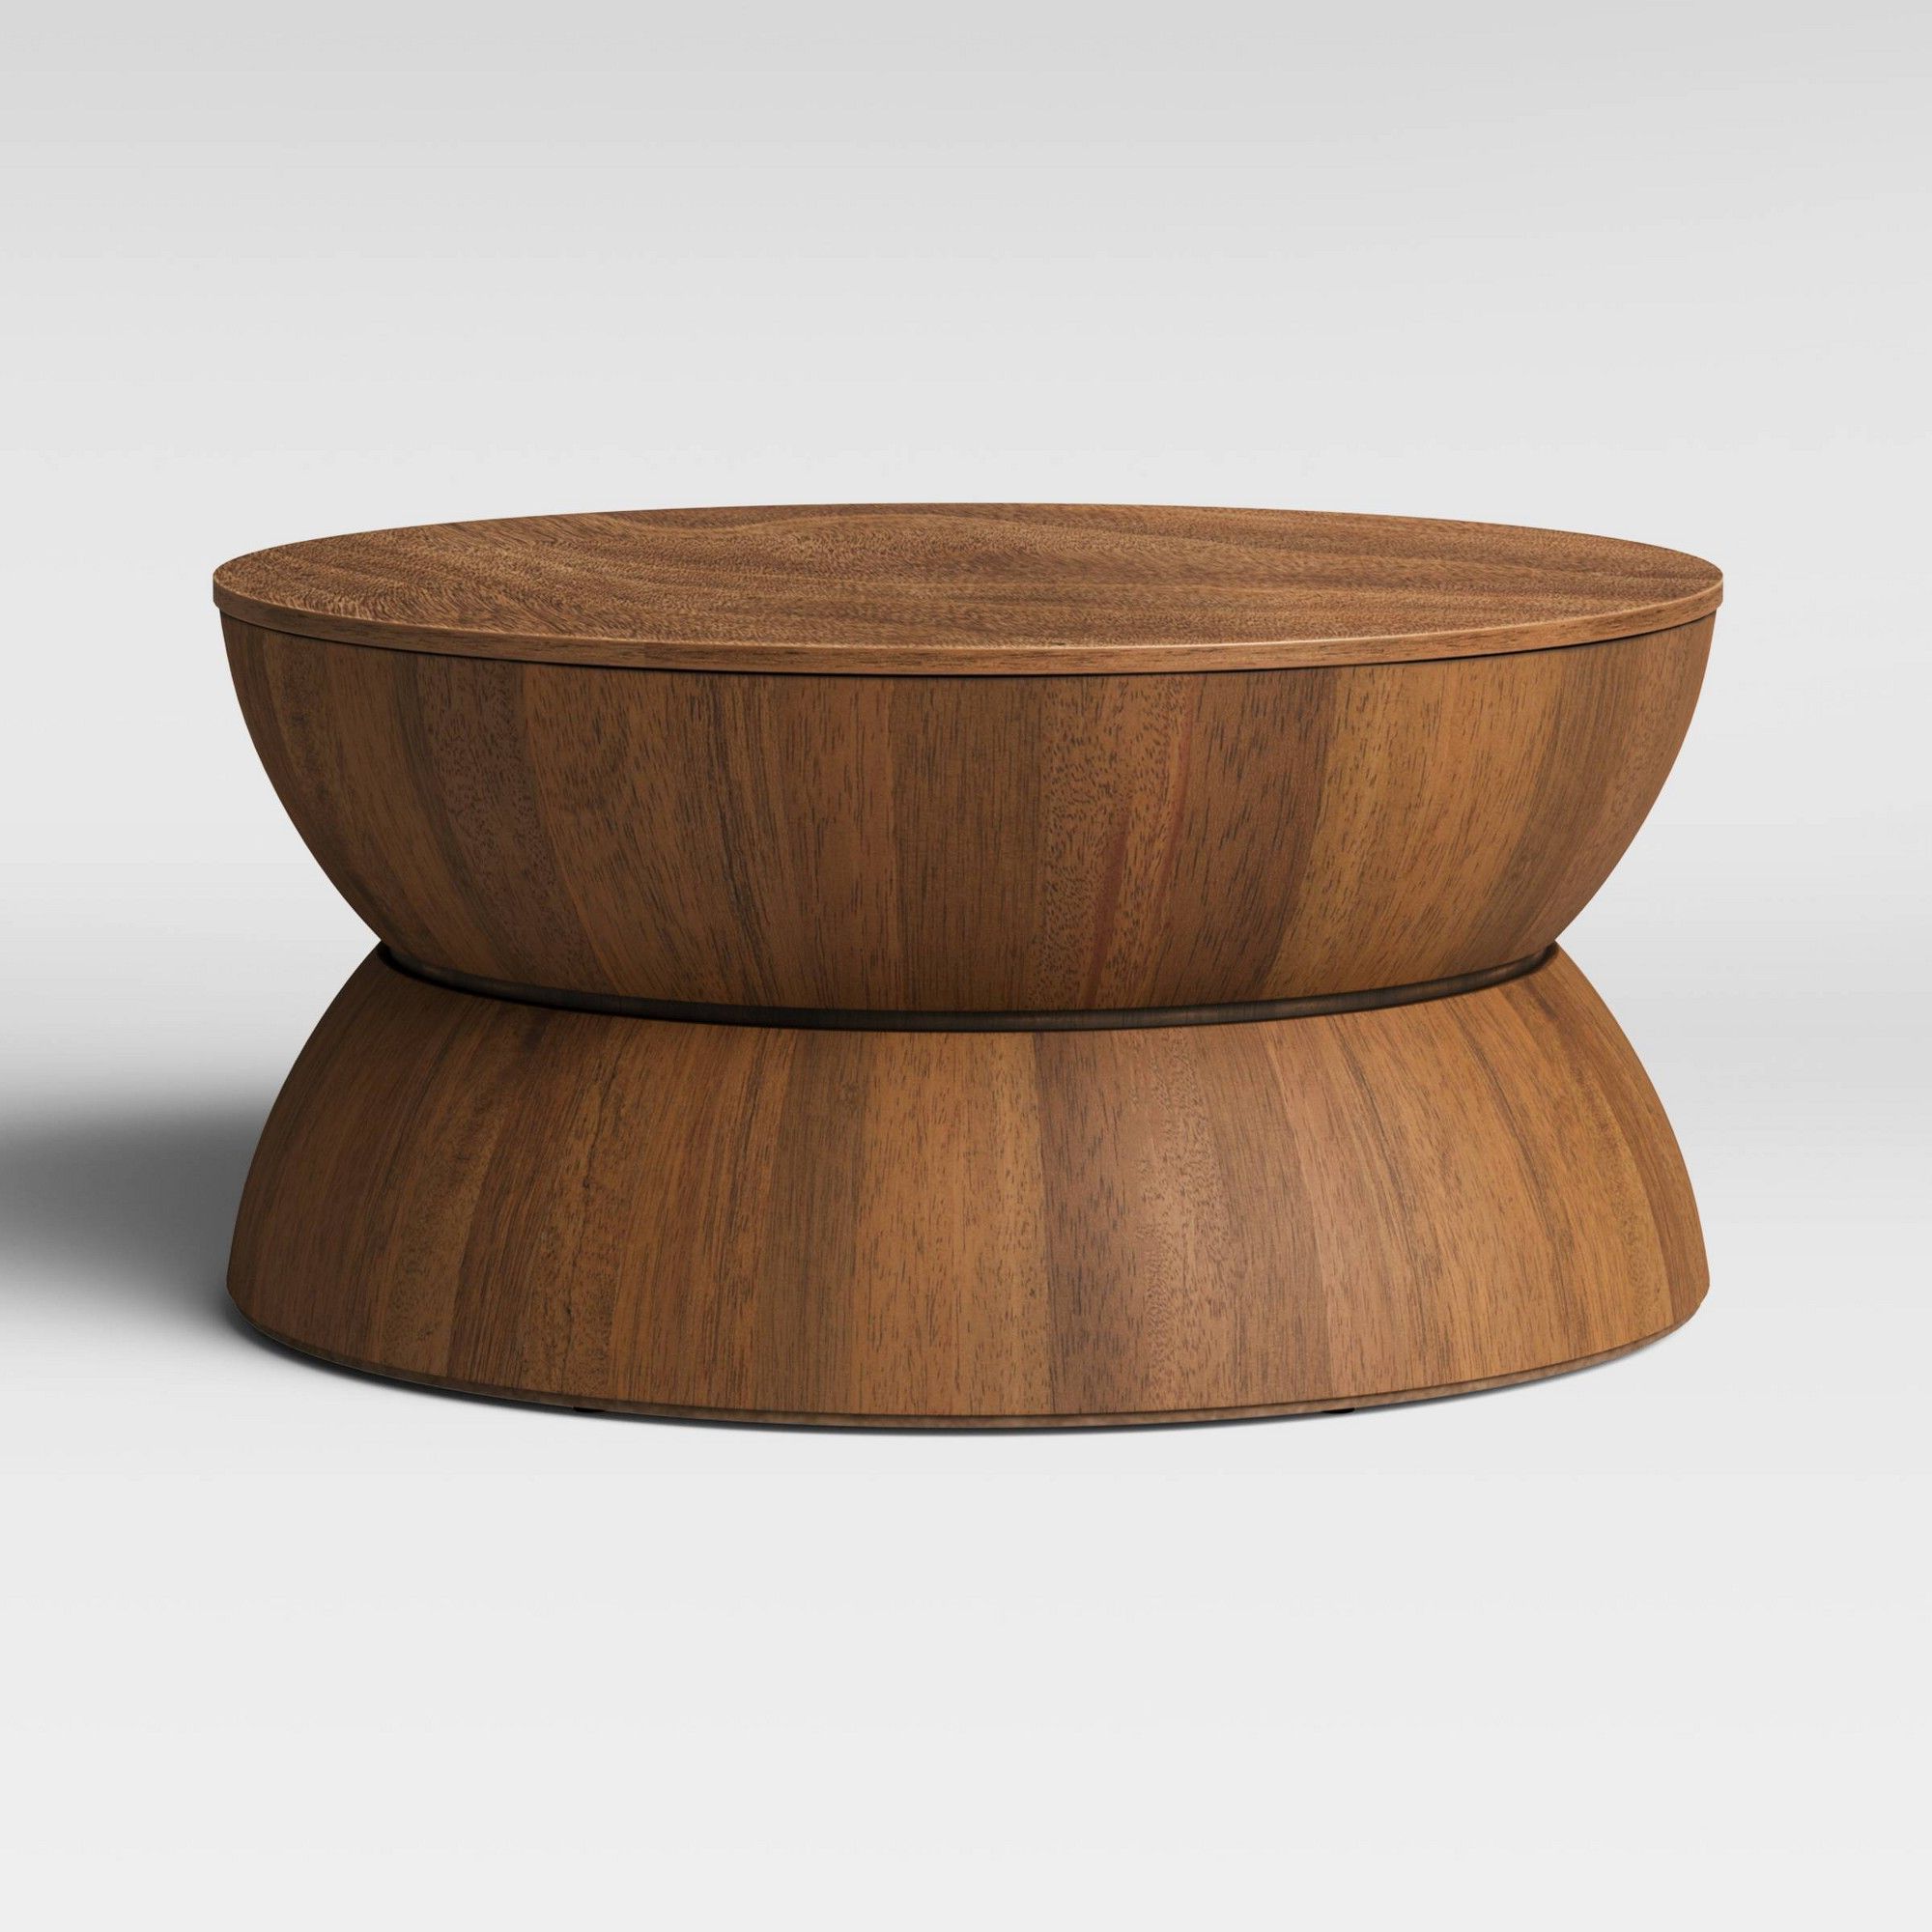 Well Known Natural Wood Coffee Tables Regarding Prisma Round Natural Wood Turned Drum Coffee Table Brown (View 14 of 20)